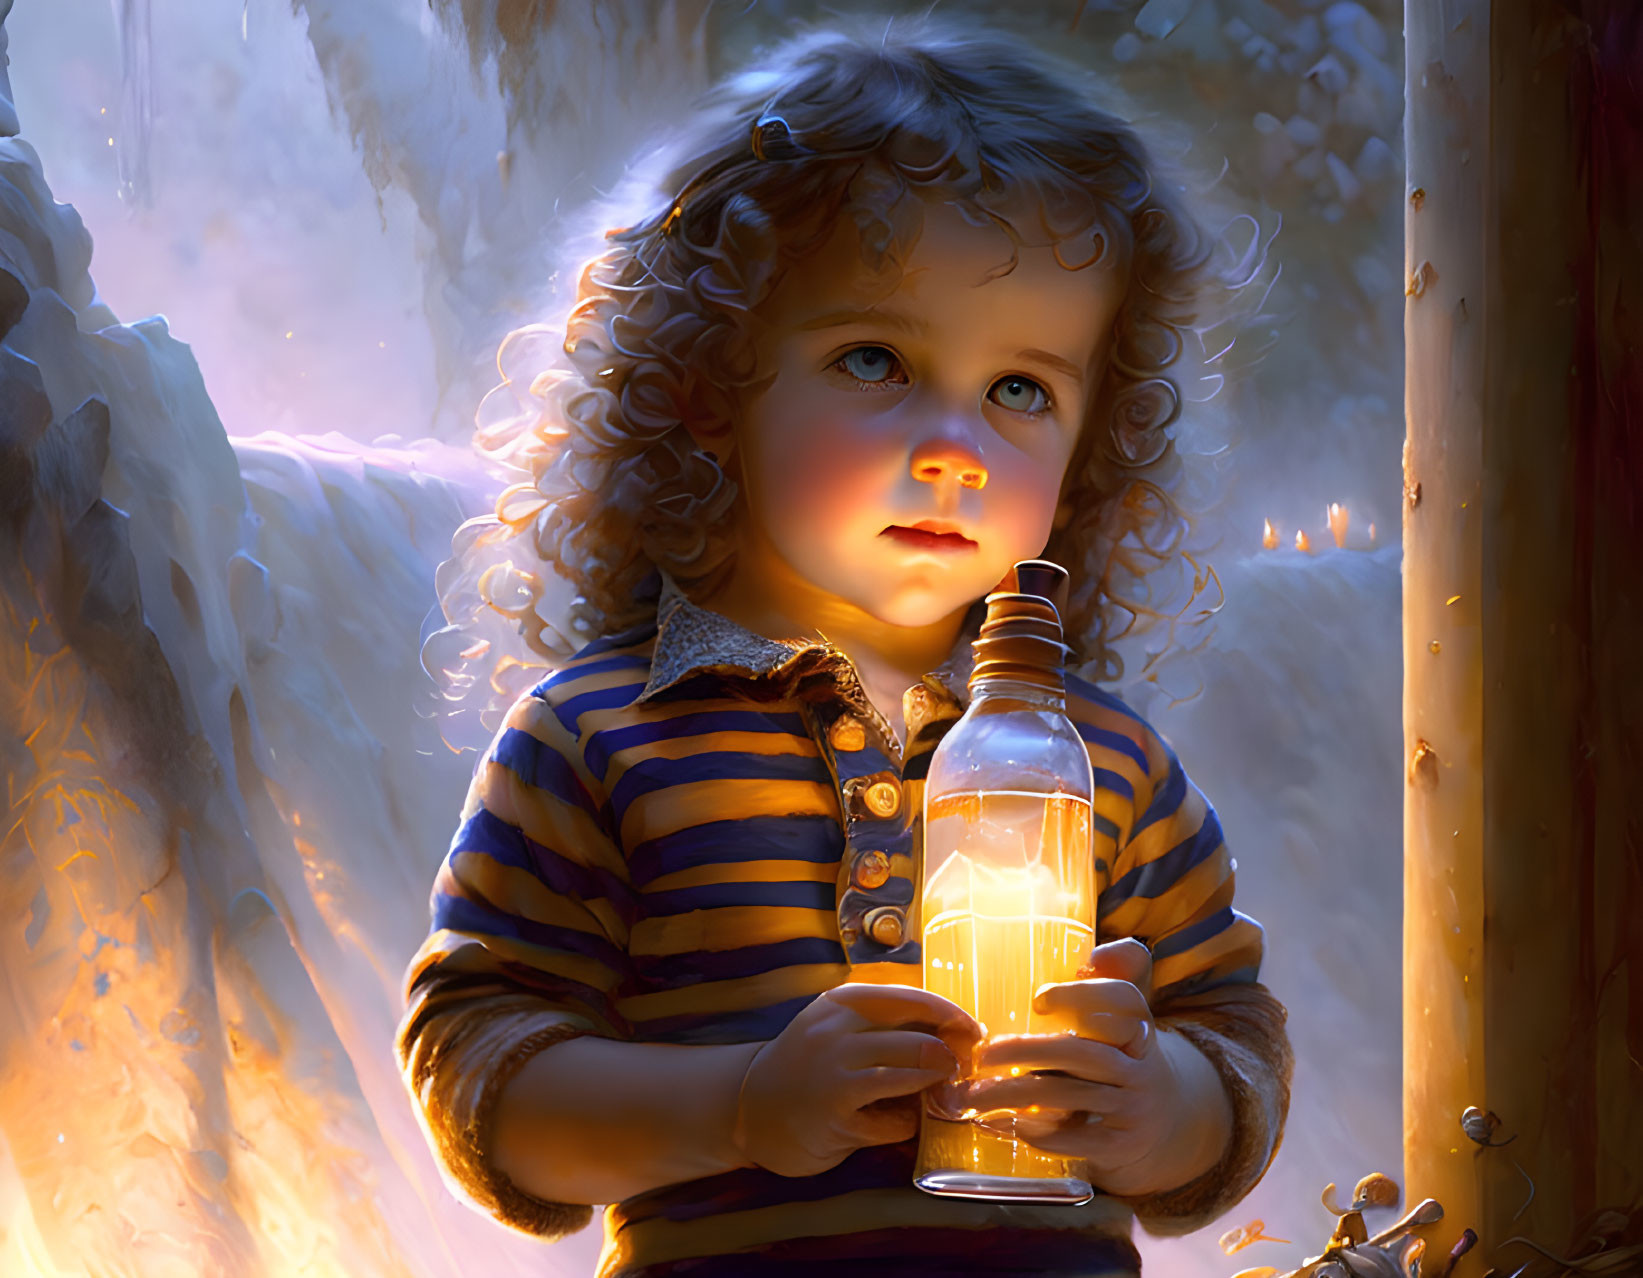 Child with Curly Hair Holding Glowing Lantern in Mystical Forest